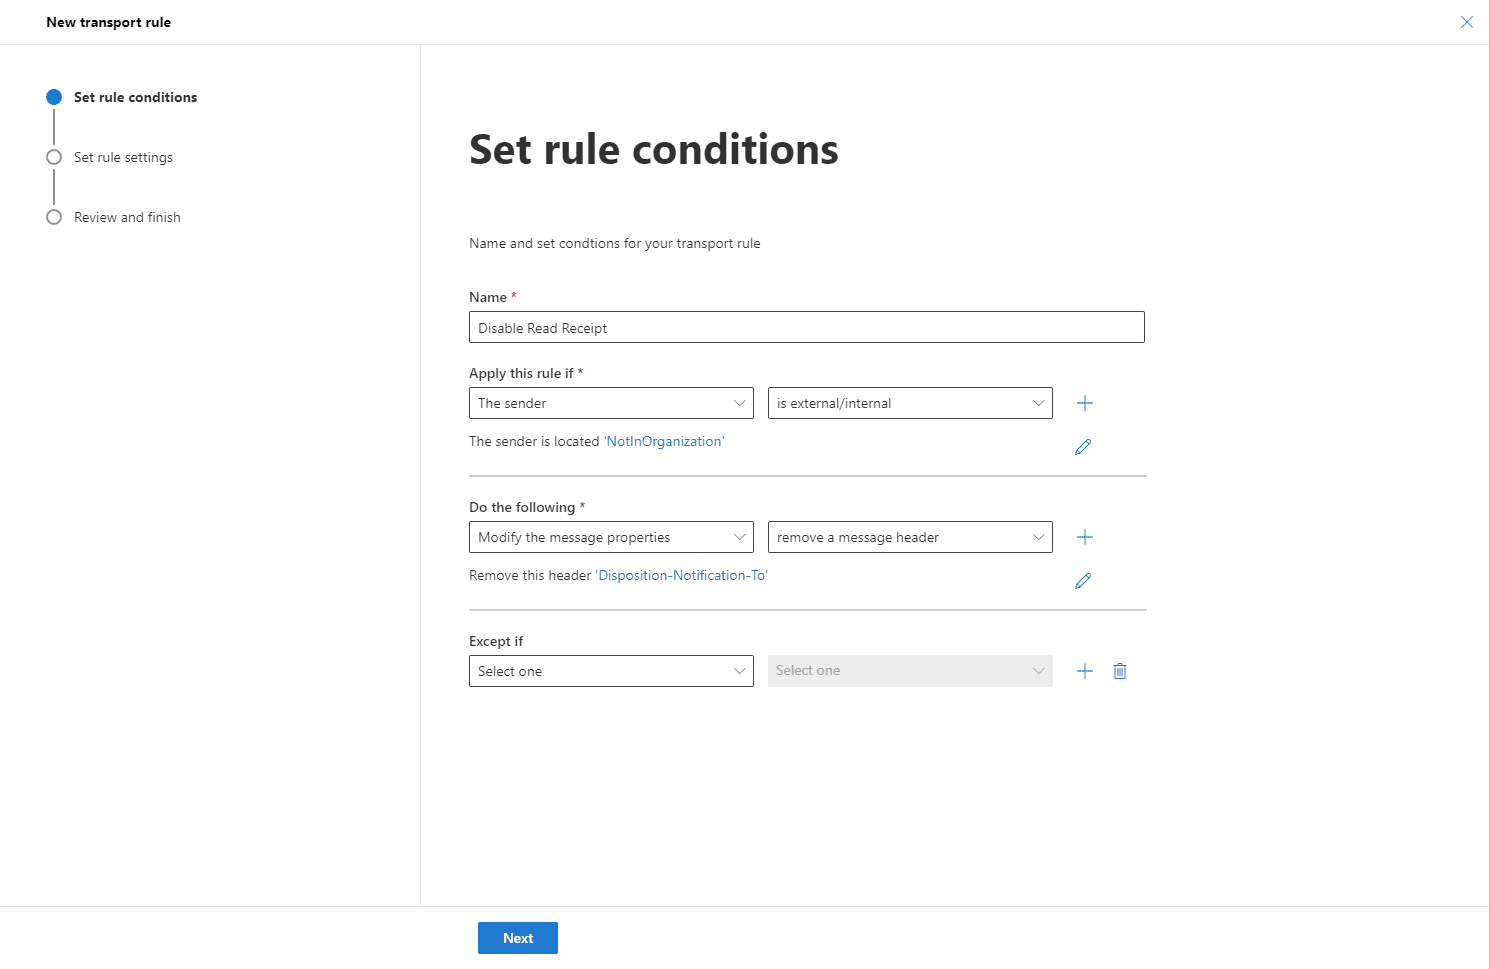 Set rule conditions - Next Step